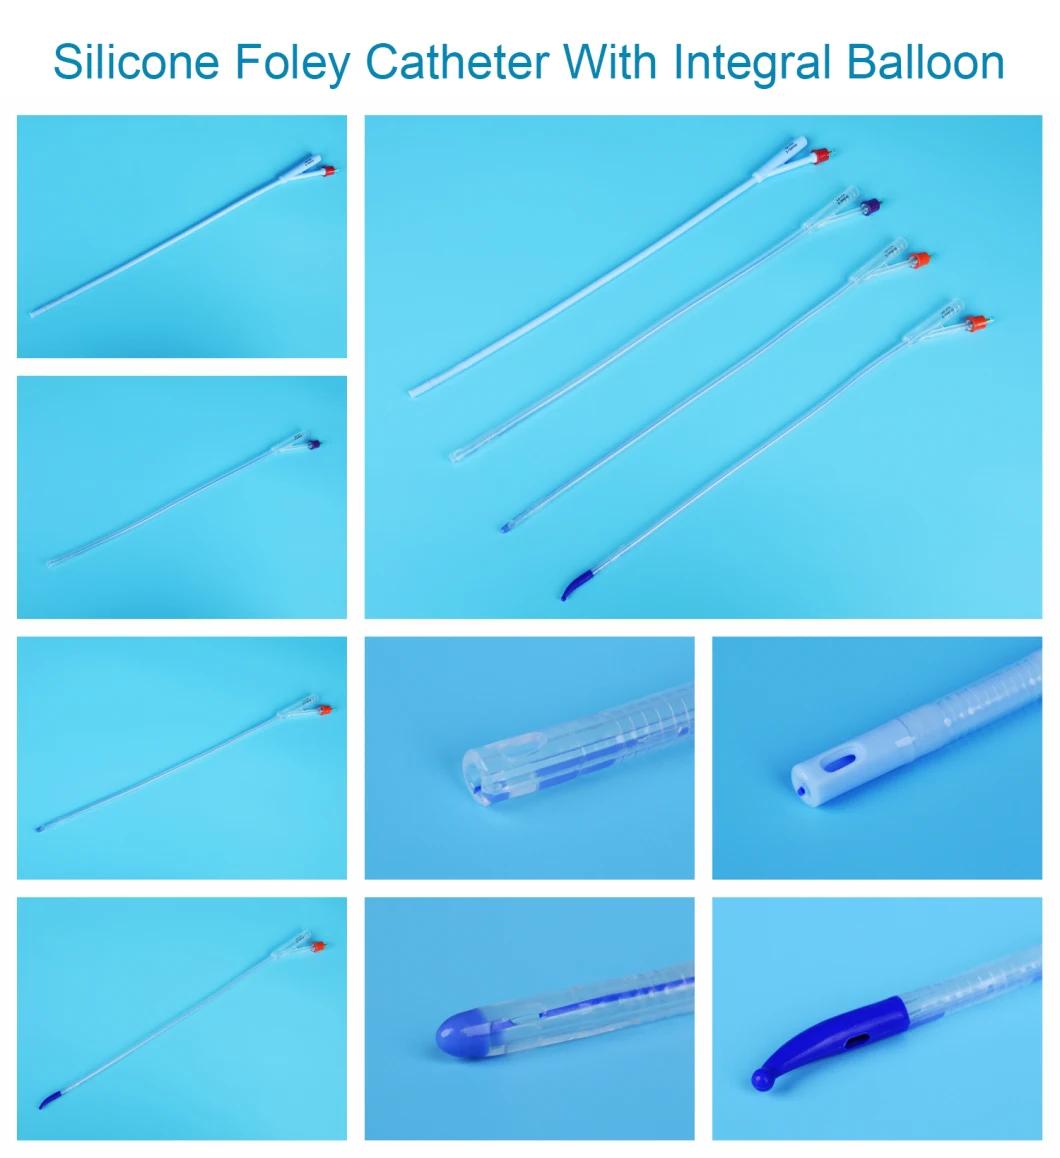 Integrated Flat Balloon Silicone Urinary Catheter with Unibal Integral Balloon Technology Open Tipped Suprapubic Use 2 Way Transparent